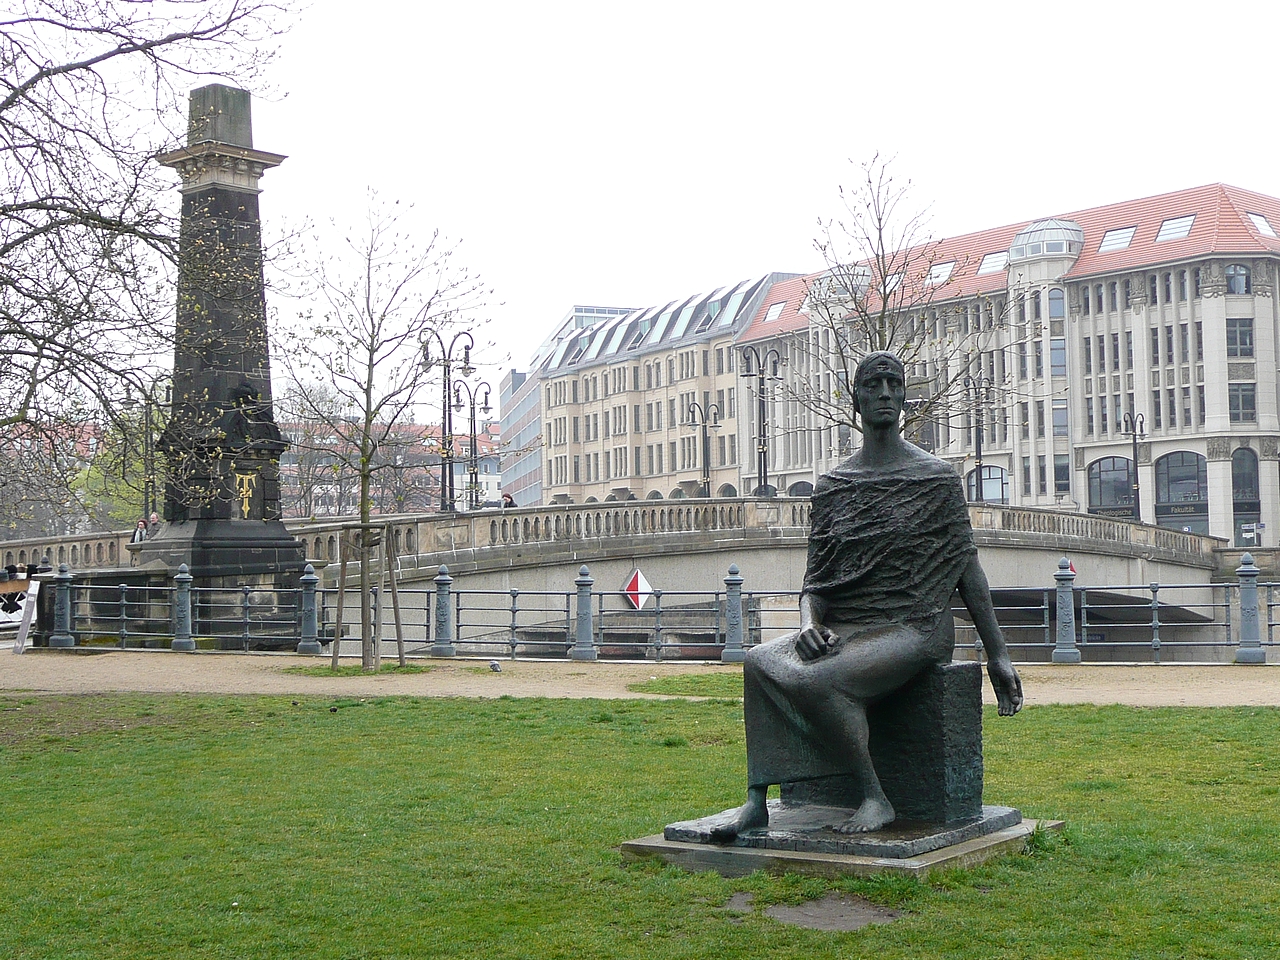 the statue is on display in the park by the water